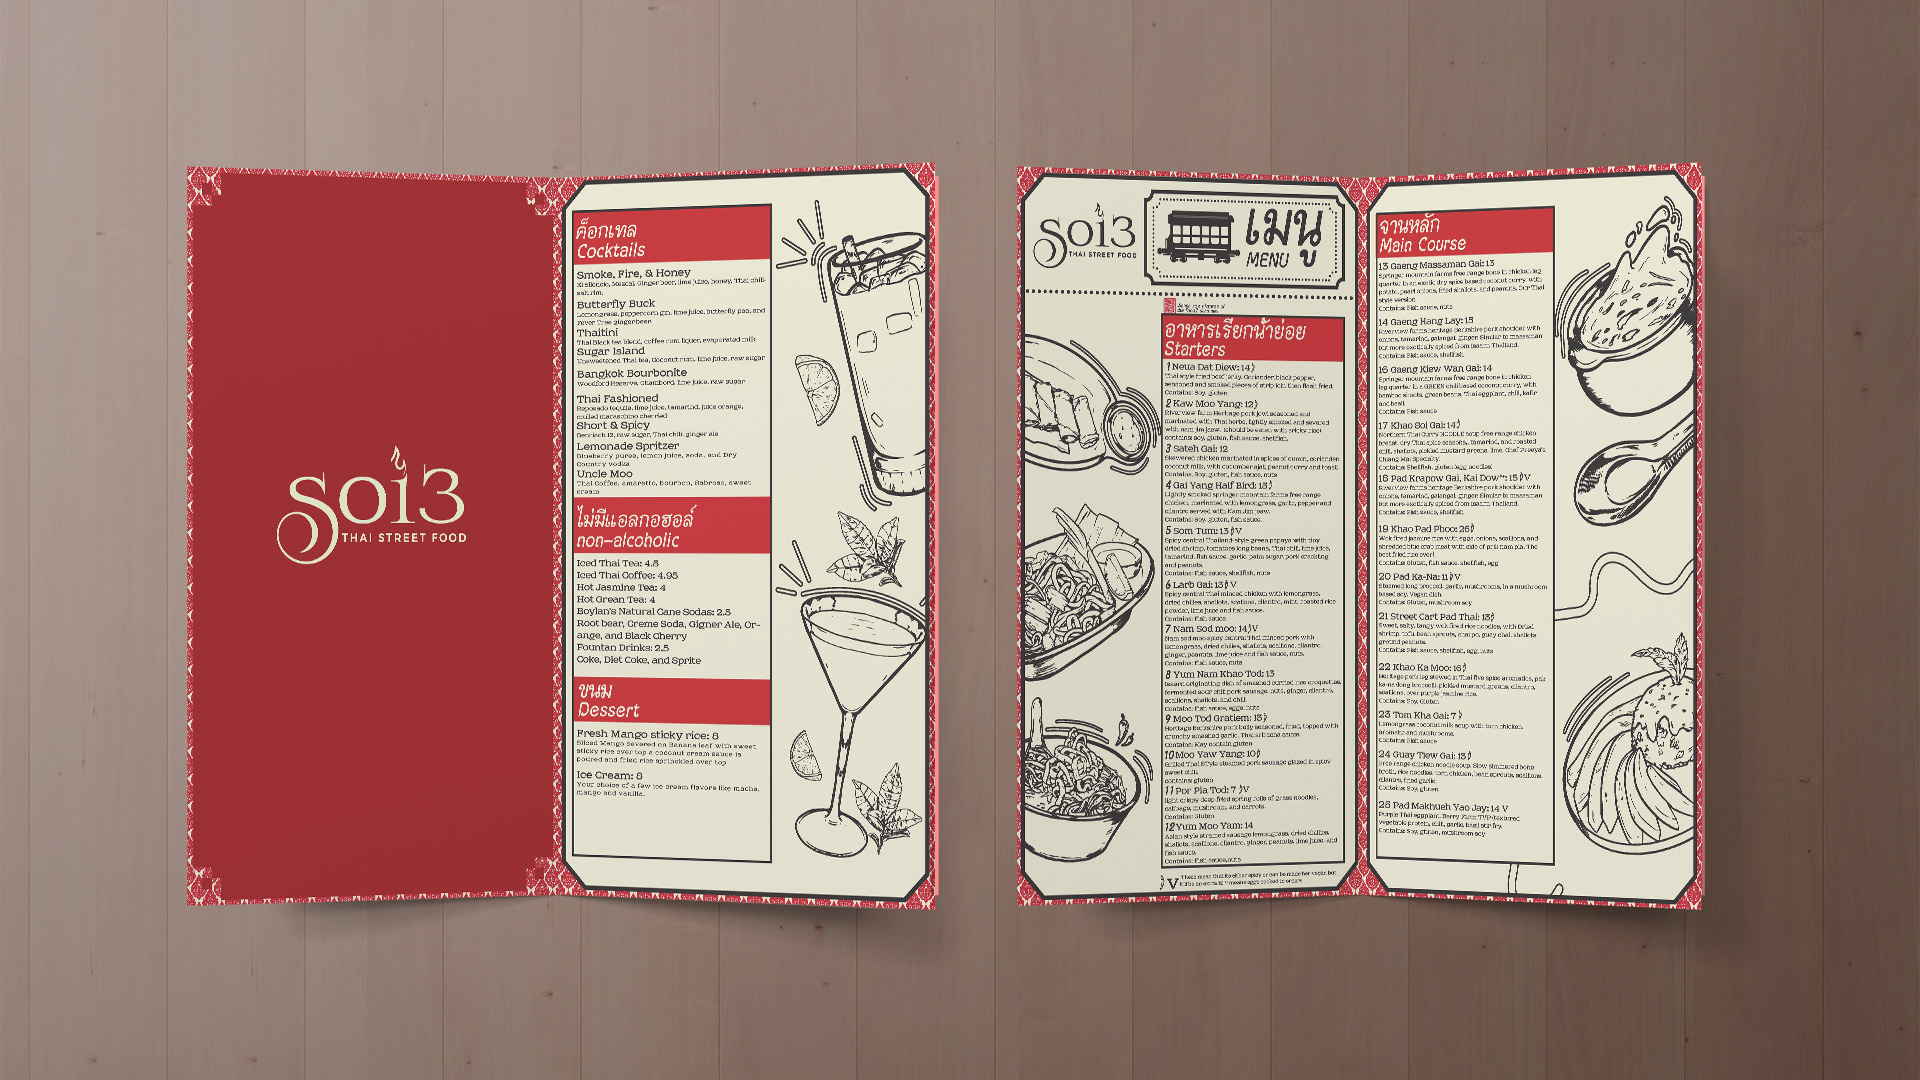 Soi3 Menu / Soi3 Menu: 8 x 14 inches, Menu Design, 2022, This was a menu redesign for a Thai restaurant called Soi3, wanted to create a classier menu that was nice but not too formal that also showed off the culture.